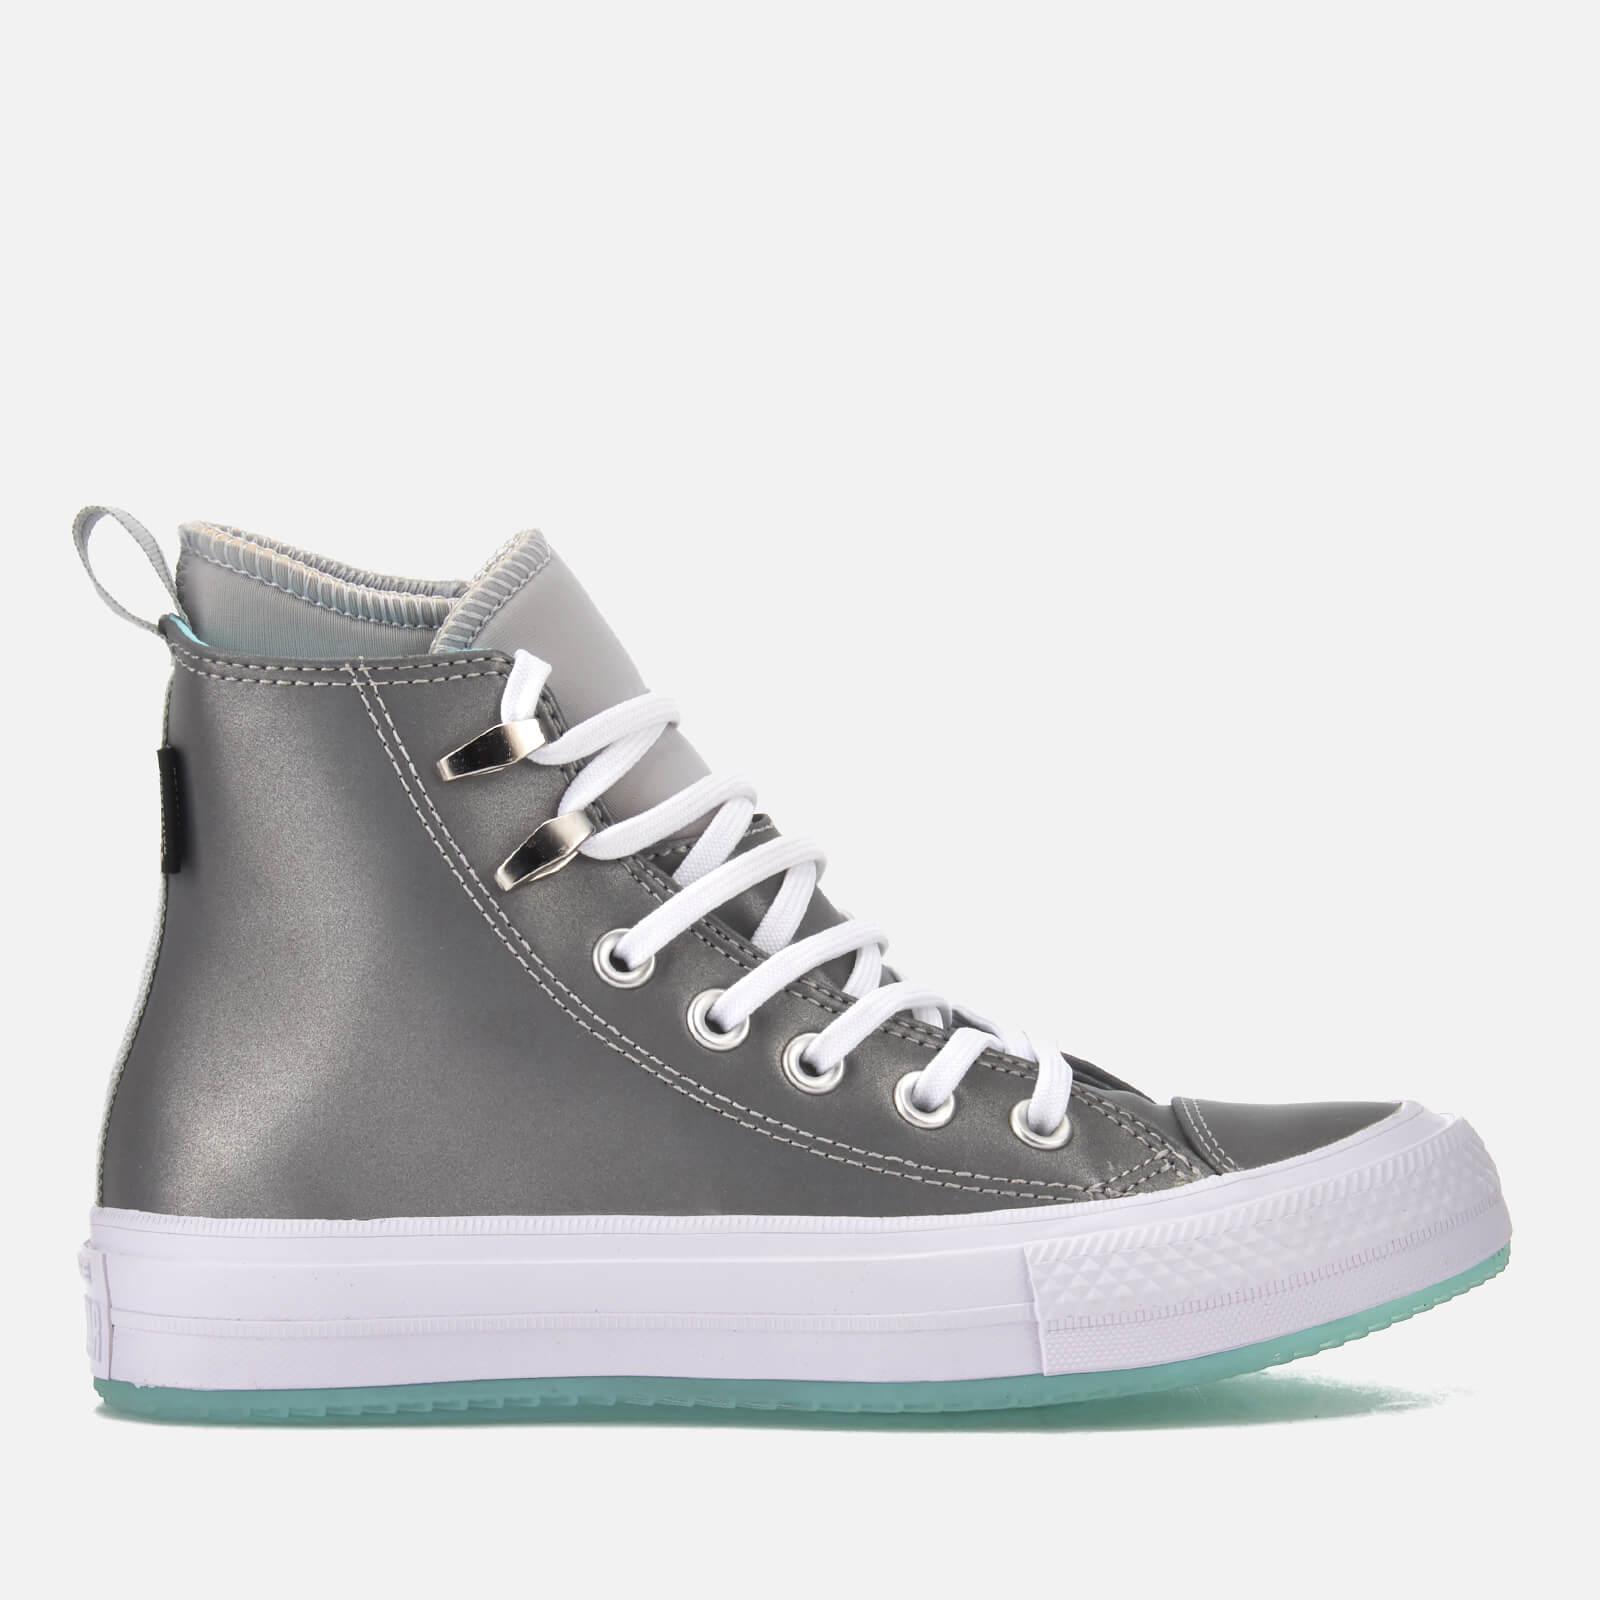 Converse Chuck Taylor All Star Waterproof Boots in Grey (Gray) - Lyst